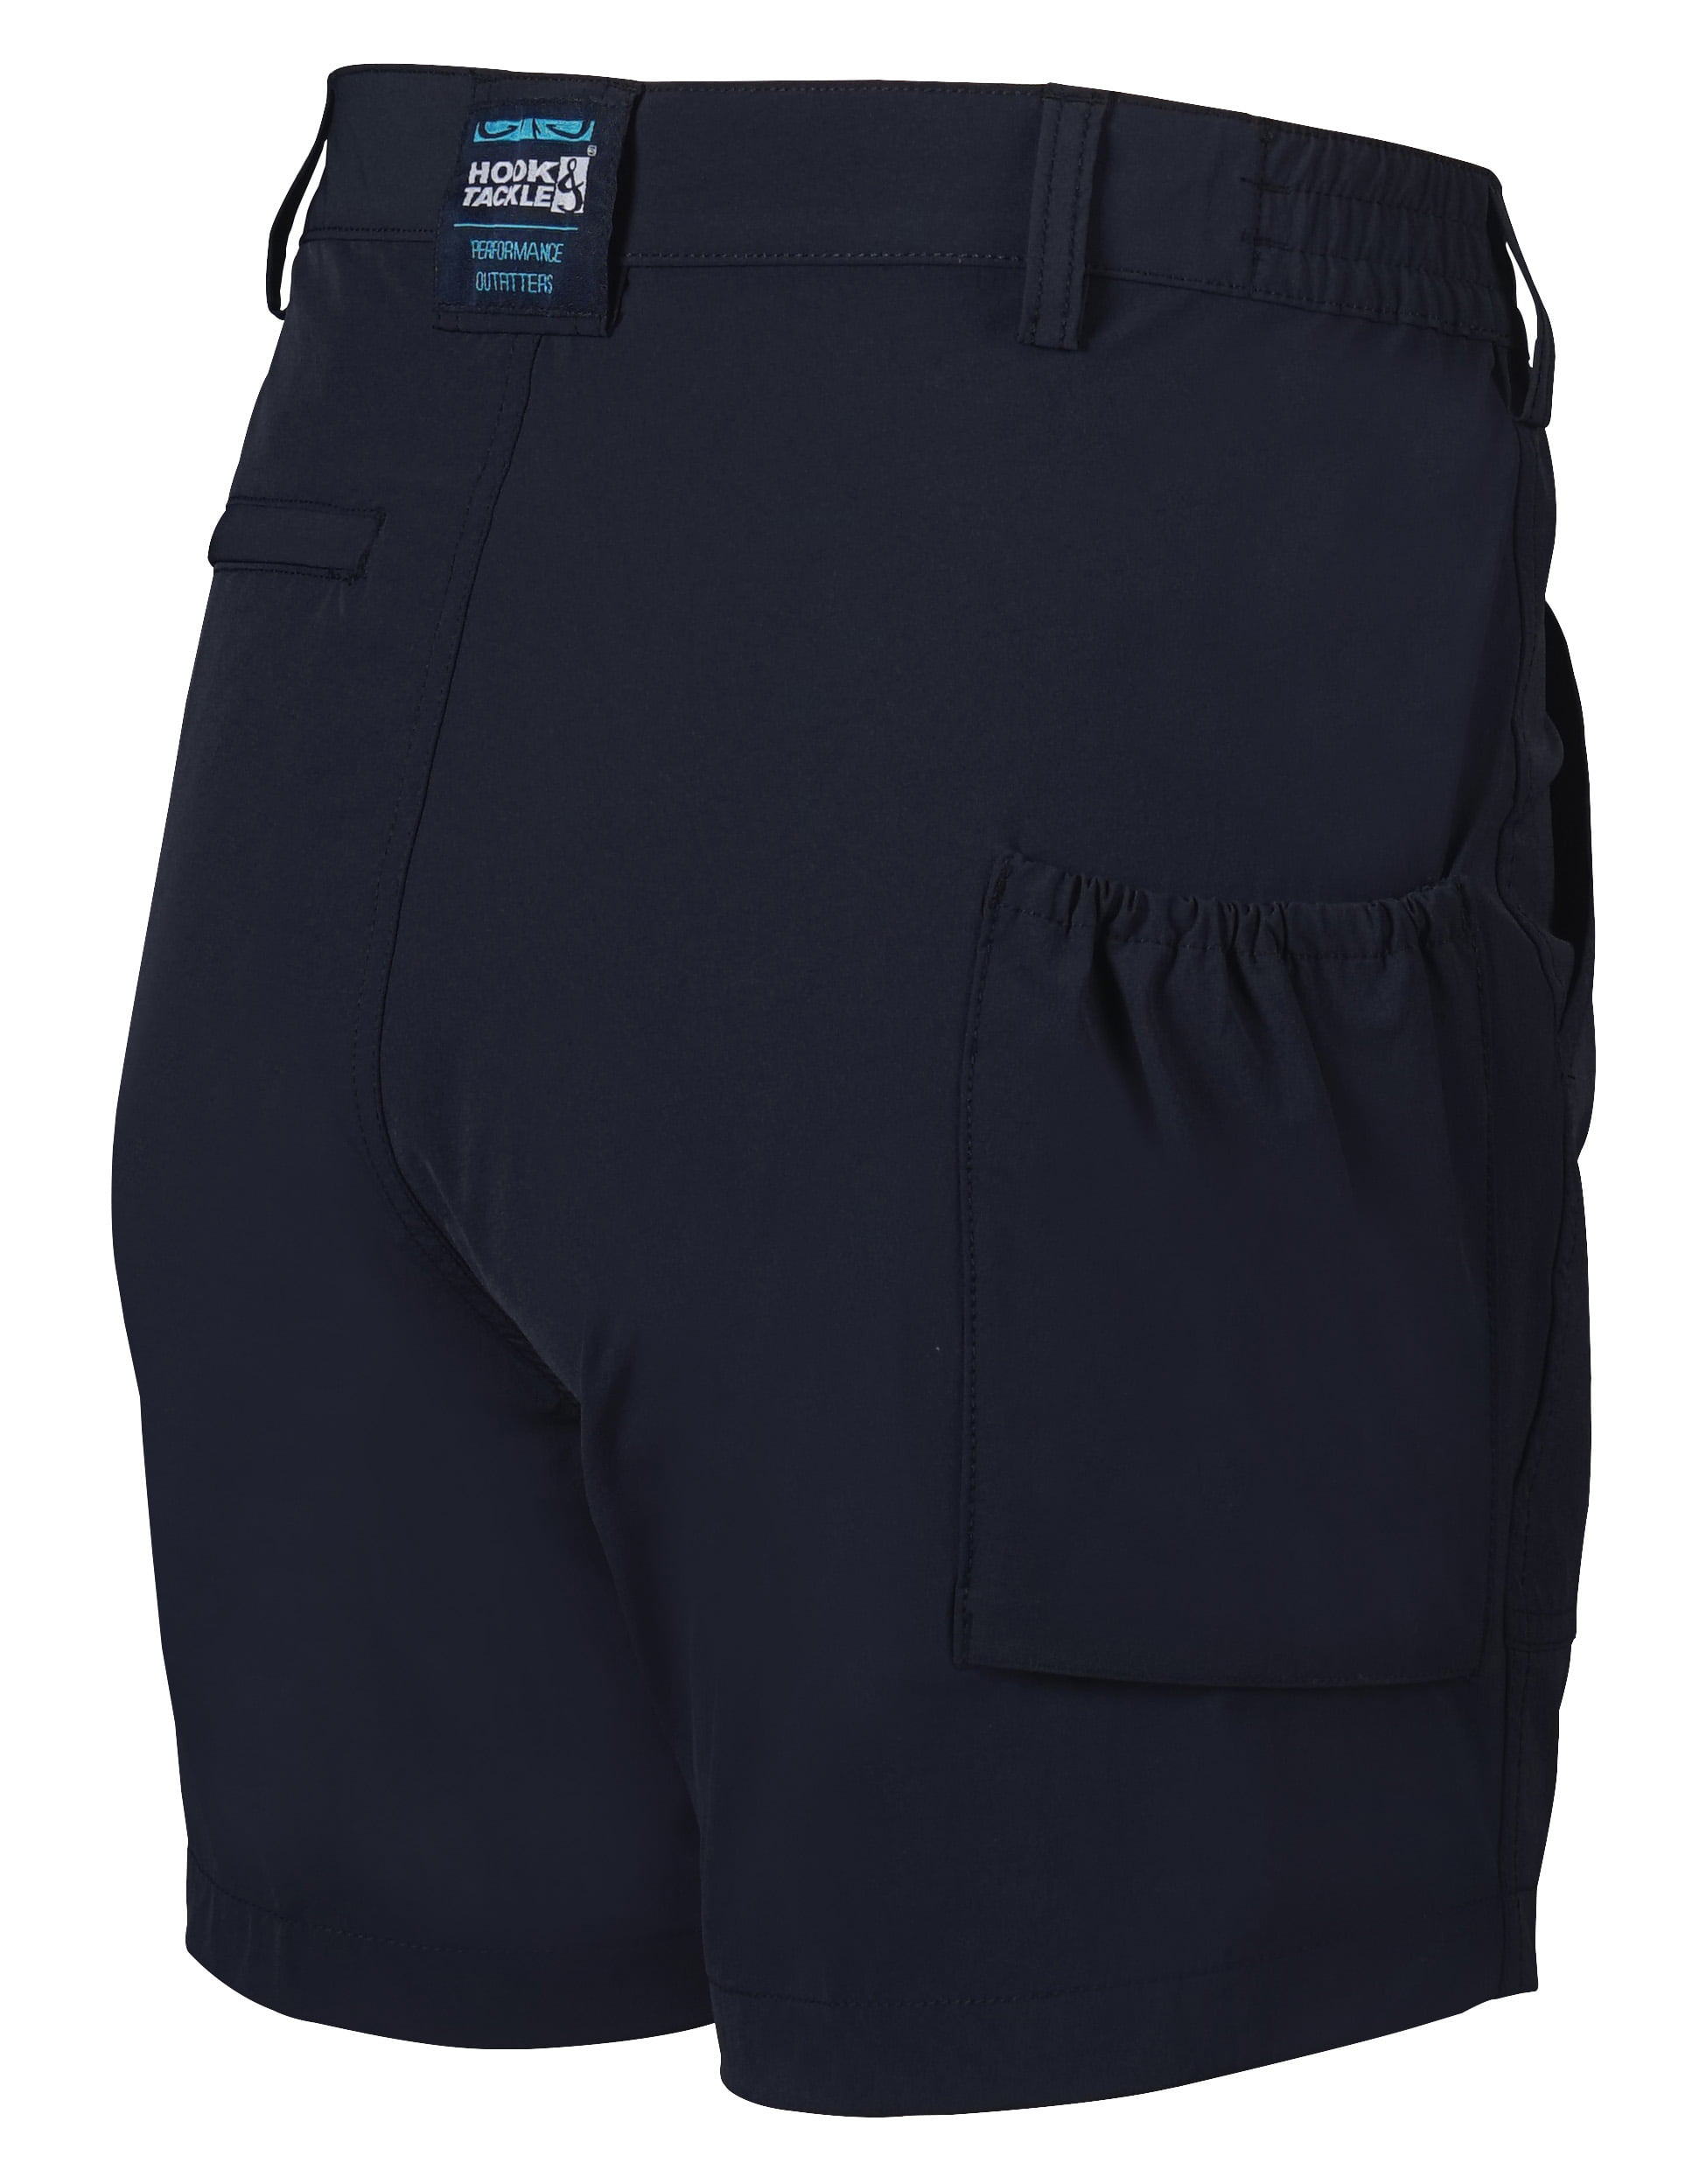 Beer Can Island® 4-Way Stretch Shorts, 53% OFF